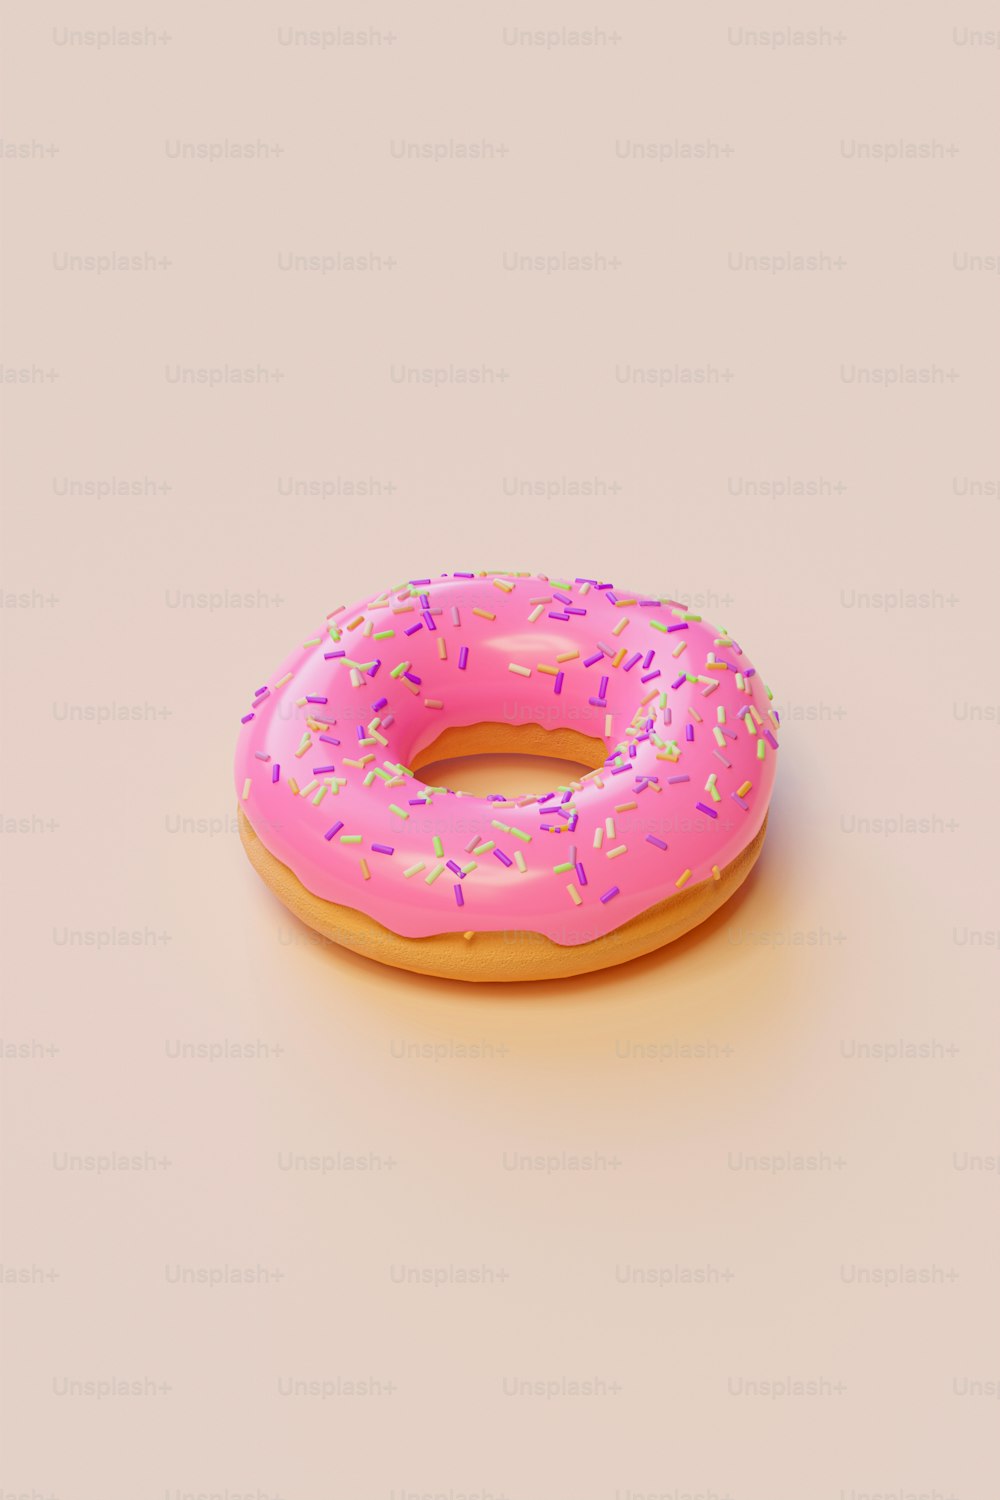 a pink donut with sprinkles on it